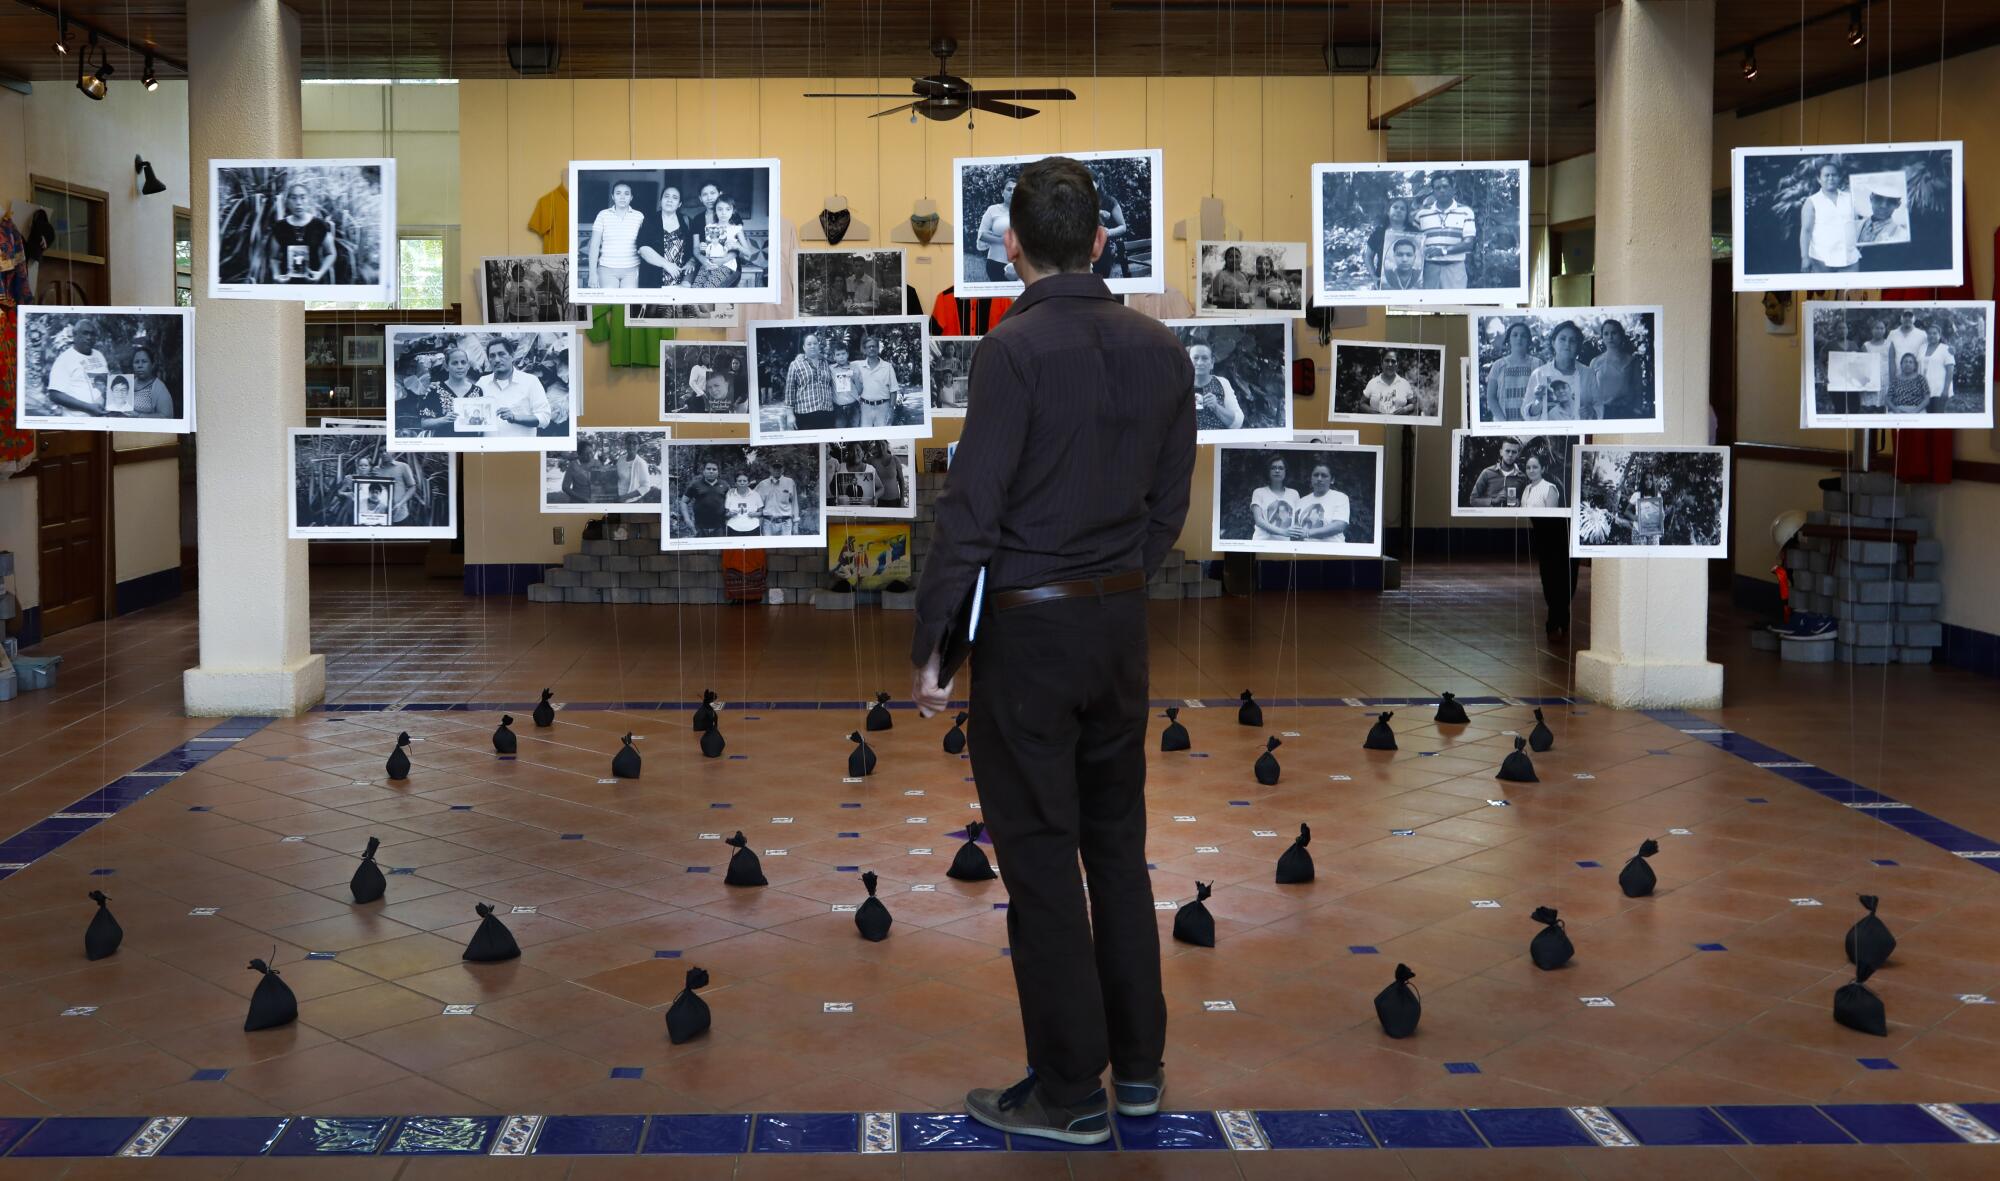 The personal effects and photos of those killed during the pro-democracy protests are on display at the Museo de la Memoria Contra La Impunidad at the Universidad Centroamericana in Managua.